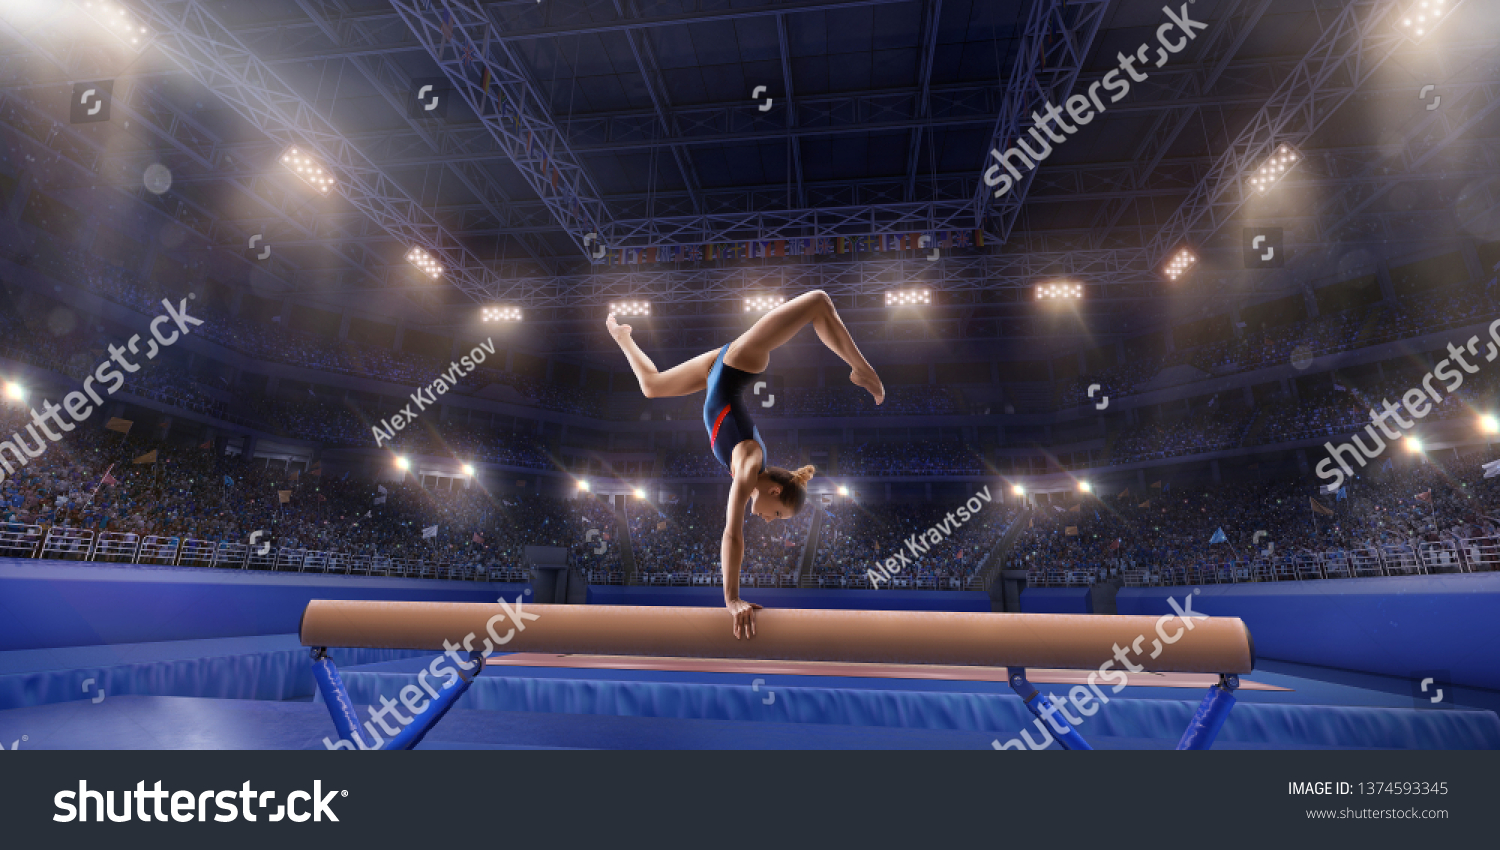 Female athlete doing a complicated exciting trick on gymnastics balance beam in a professional gym. Girl perform stunt in bright sports clothes #1374593345